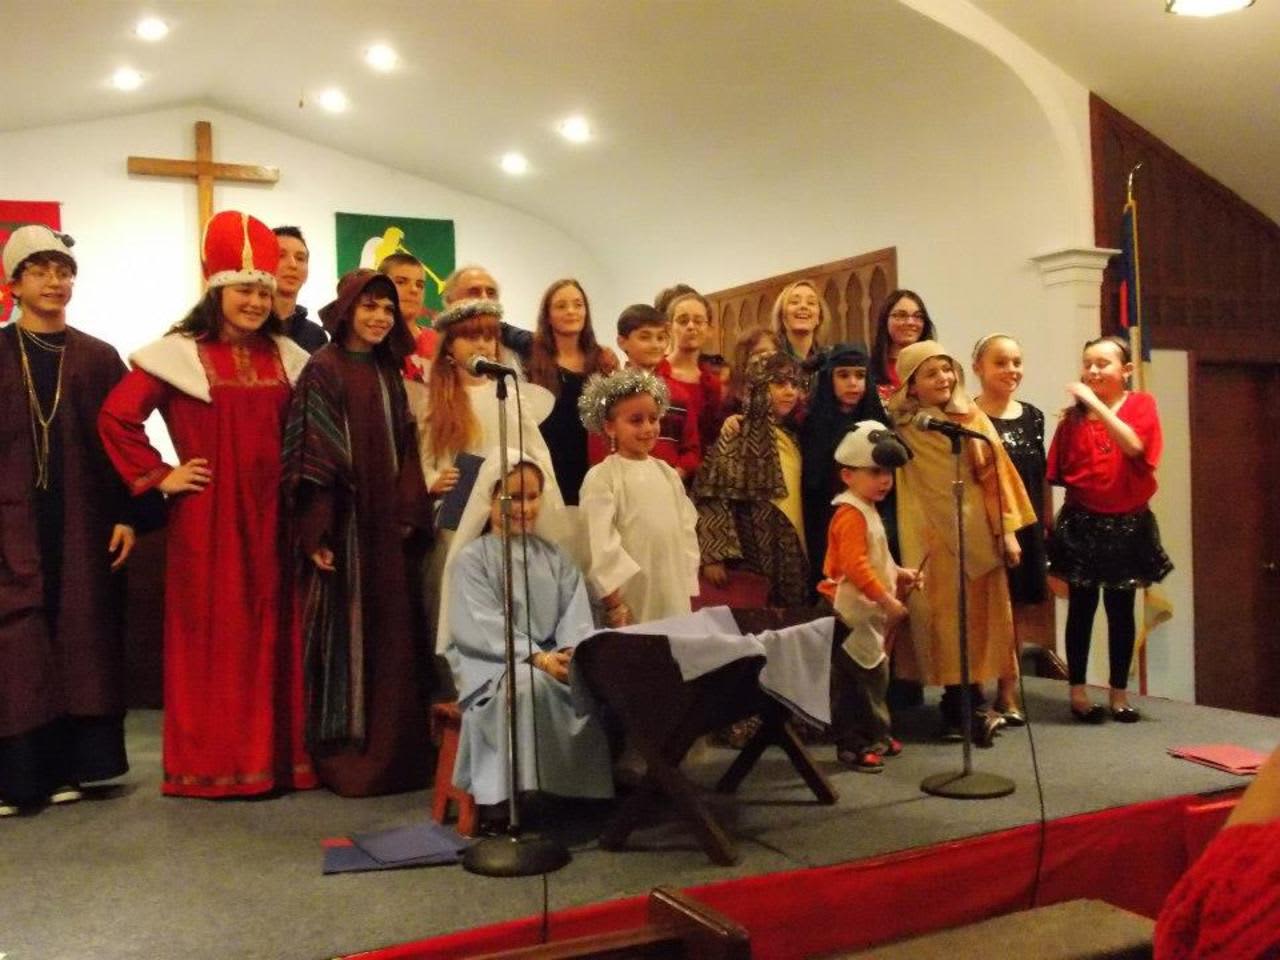 The First Reformed Church of Saddle Brook will have its Christmas Eve service at 5:30 p.m.